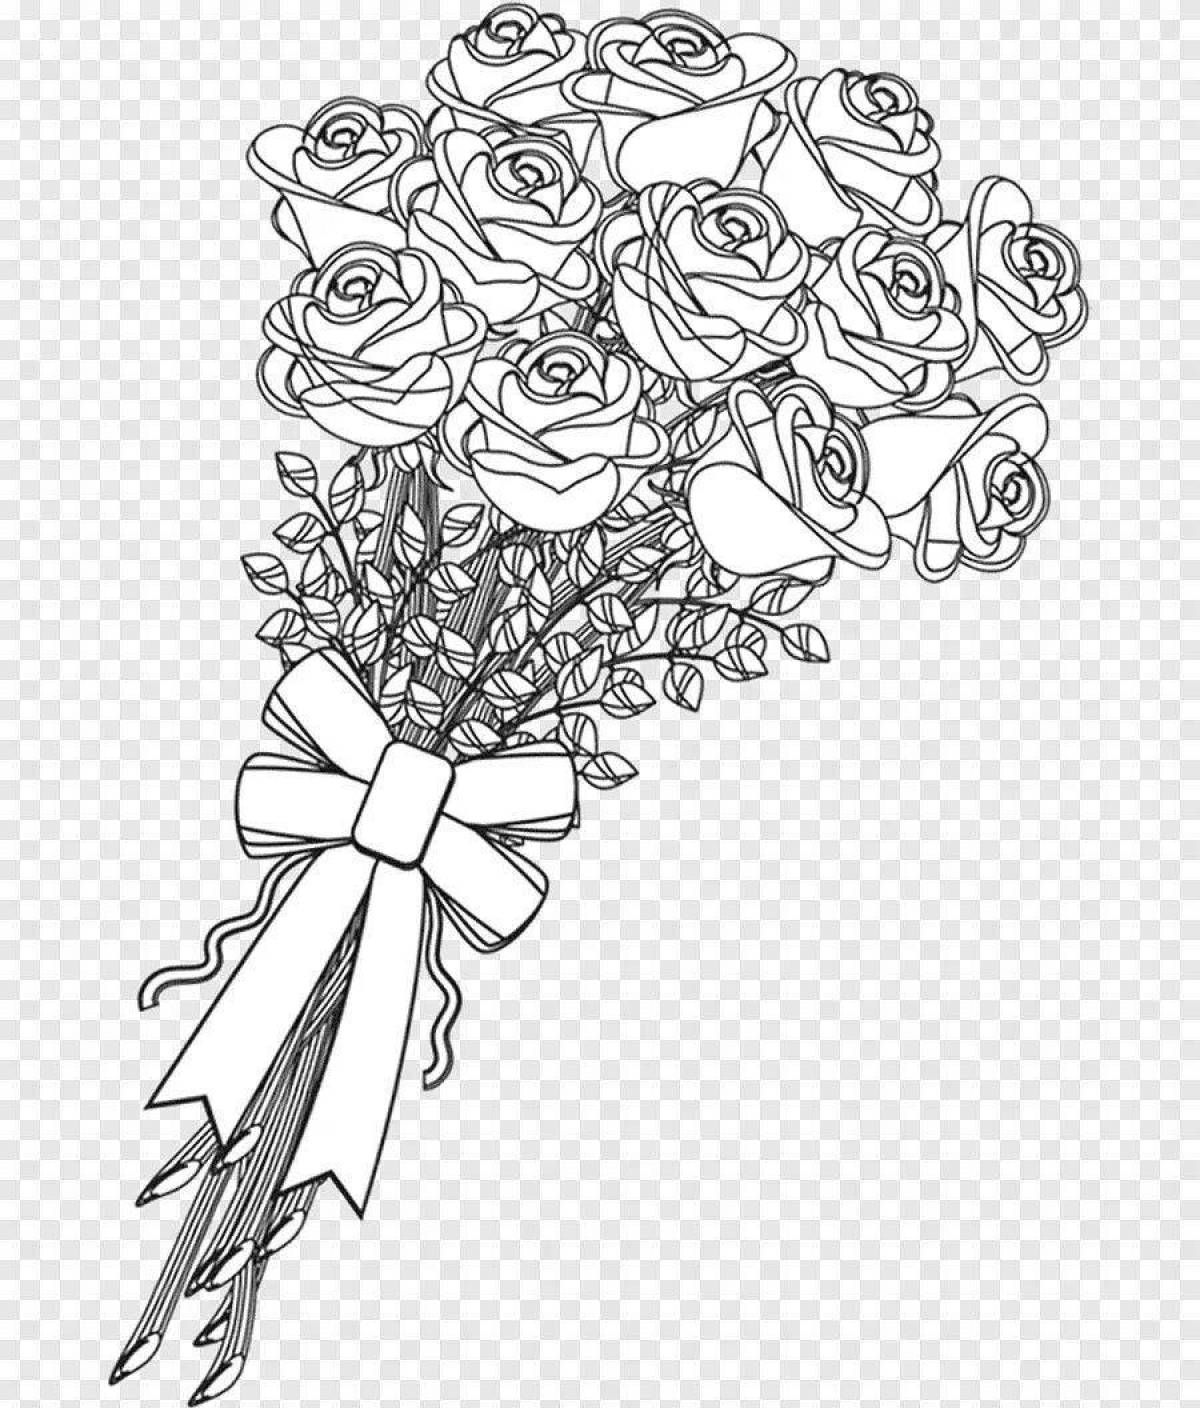 Glowing coloring pages with roses happy birthday